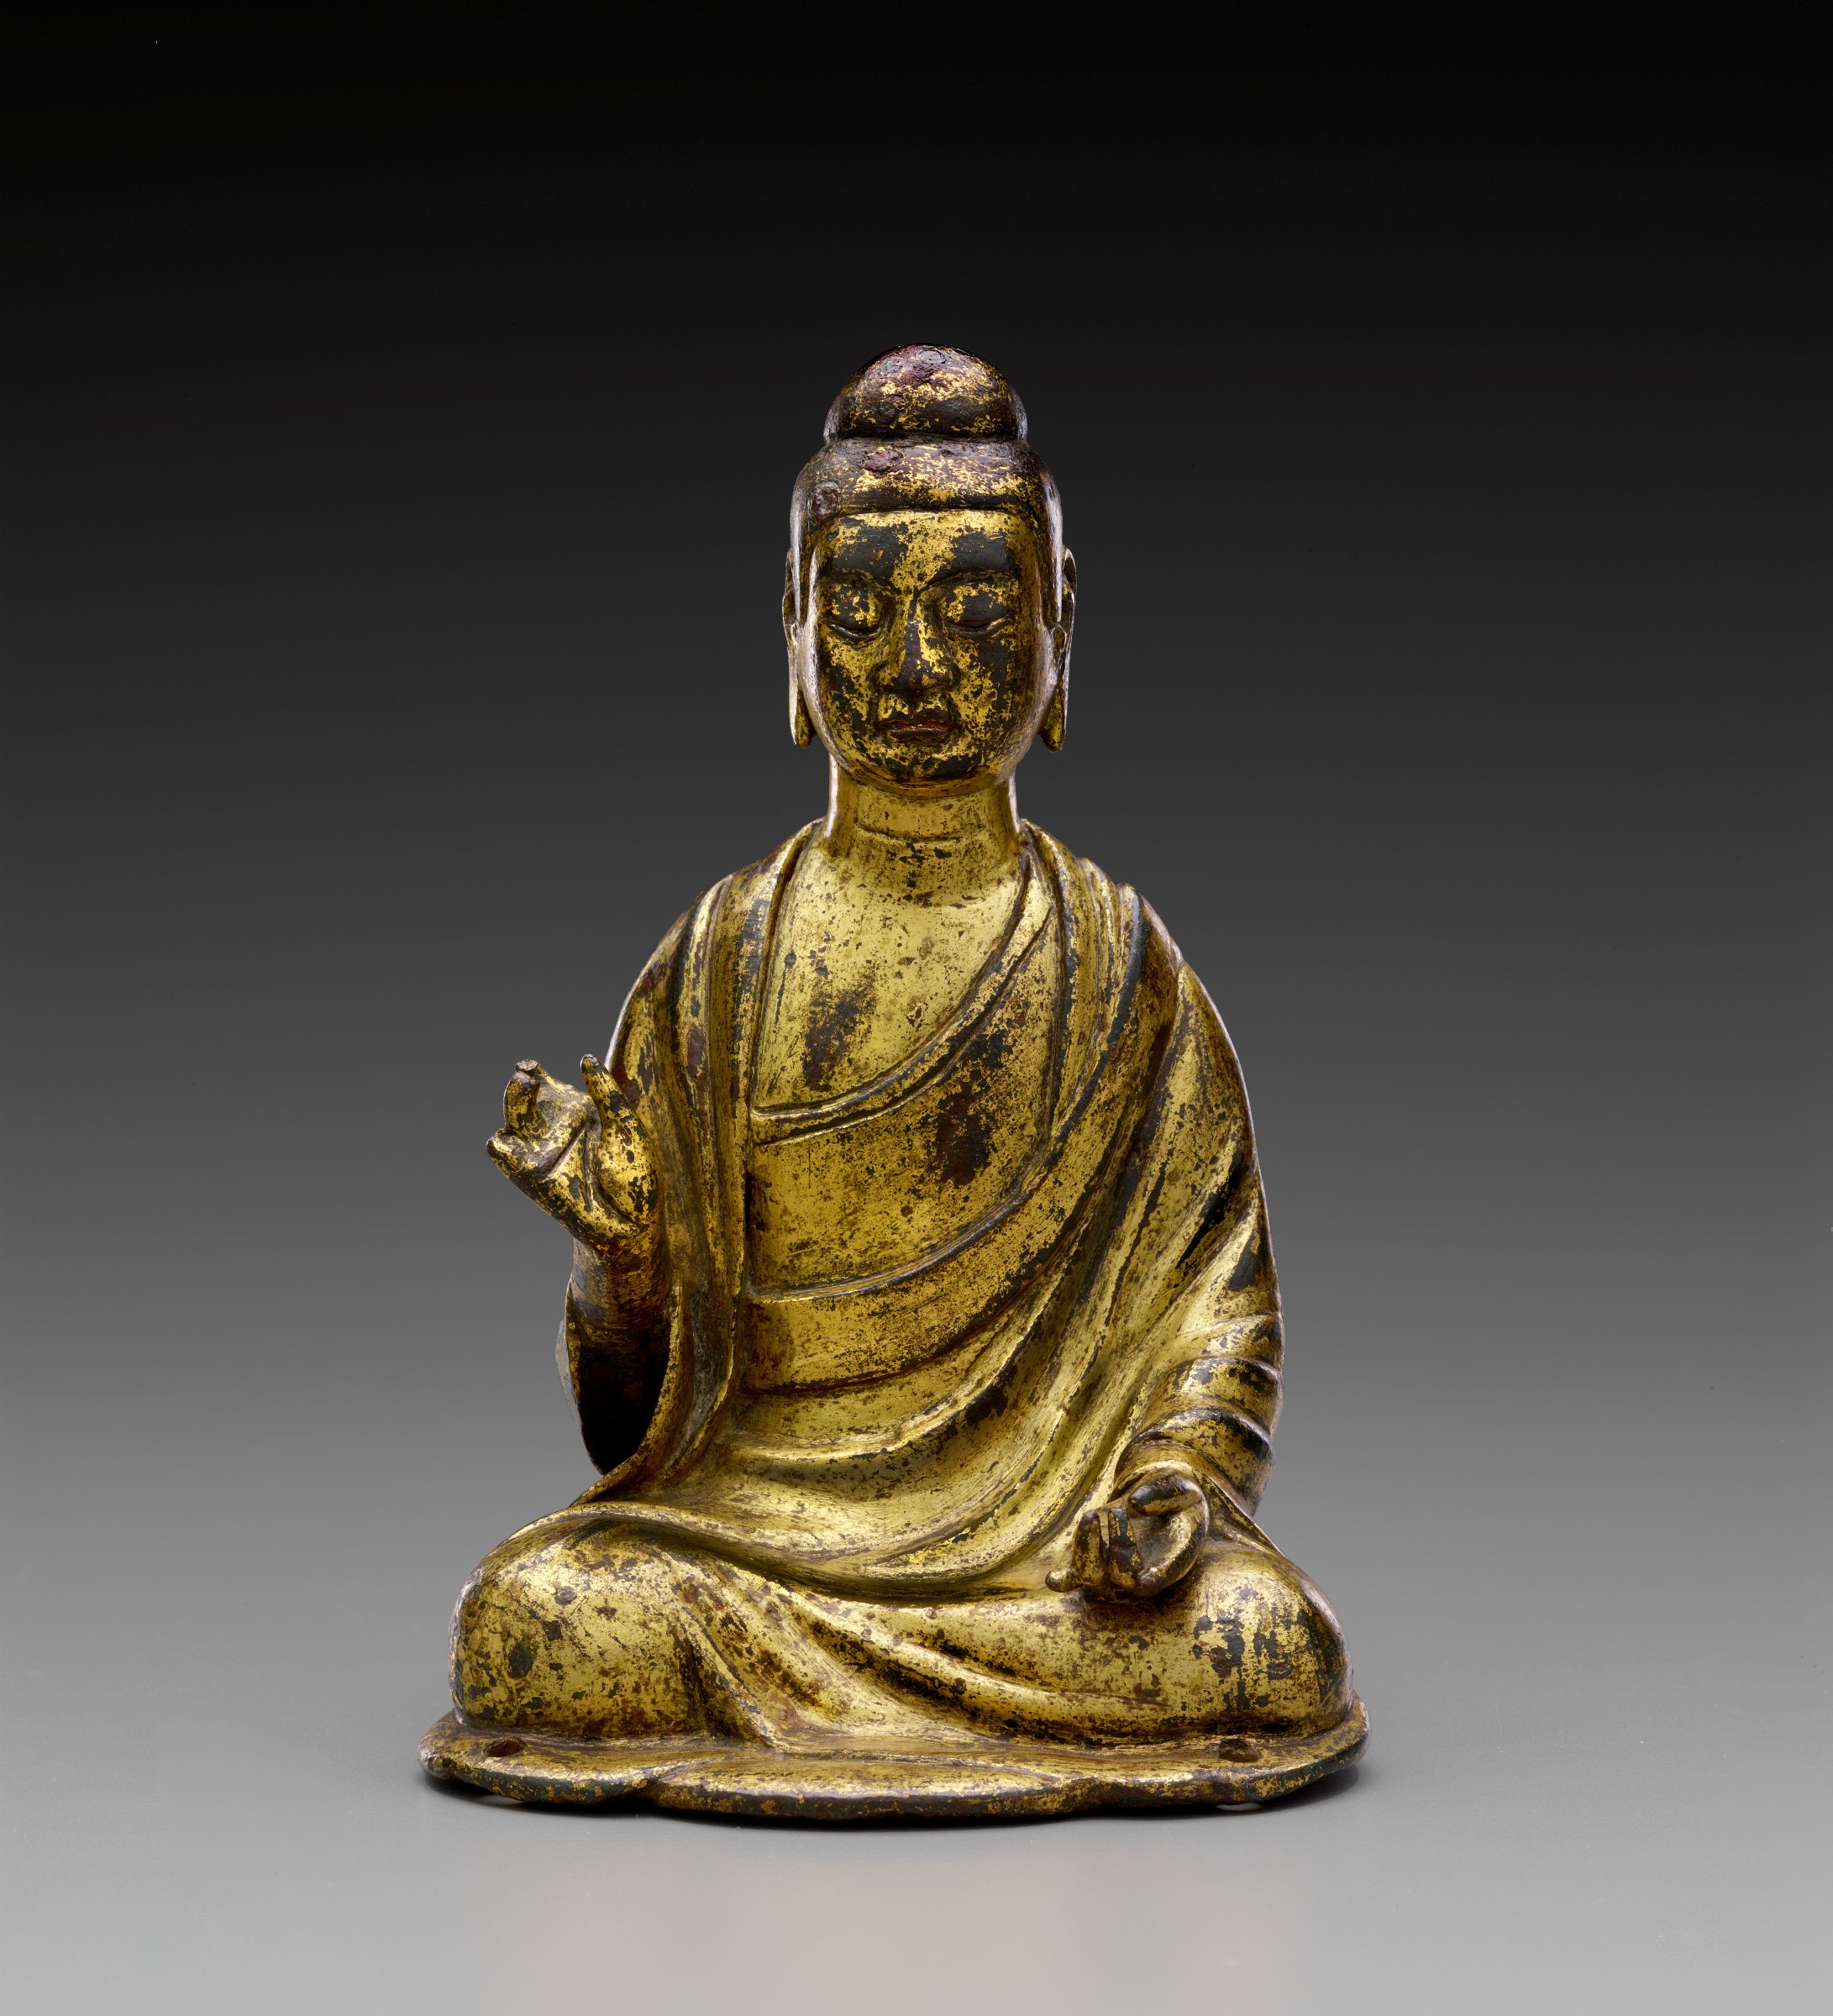 “Little Known, Little Objects”: Glittering Chinese Buddhist Figures ...